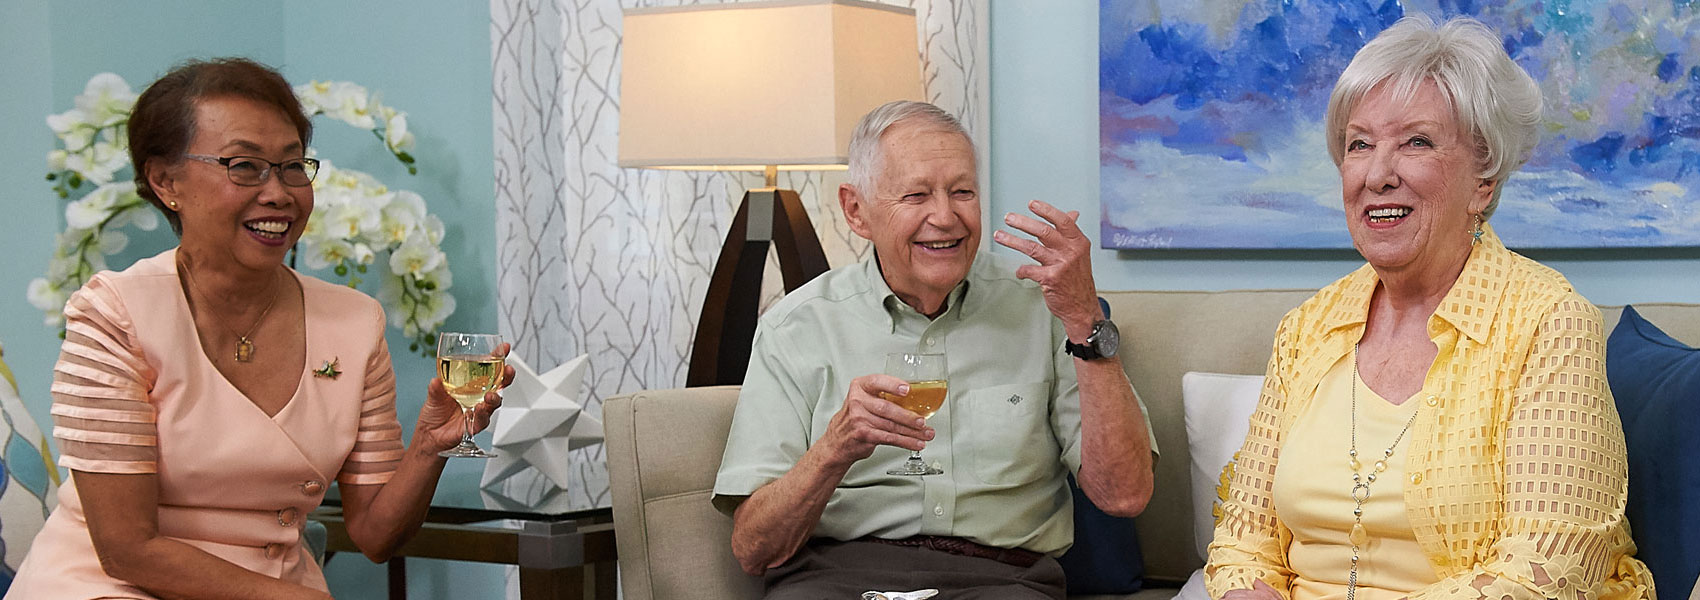 A group of seniors enjoying cocktails during happy hour at their retirement community